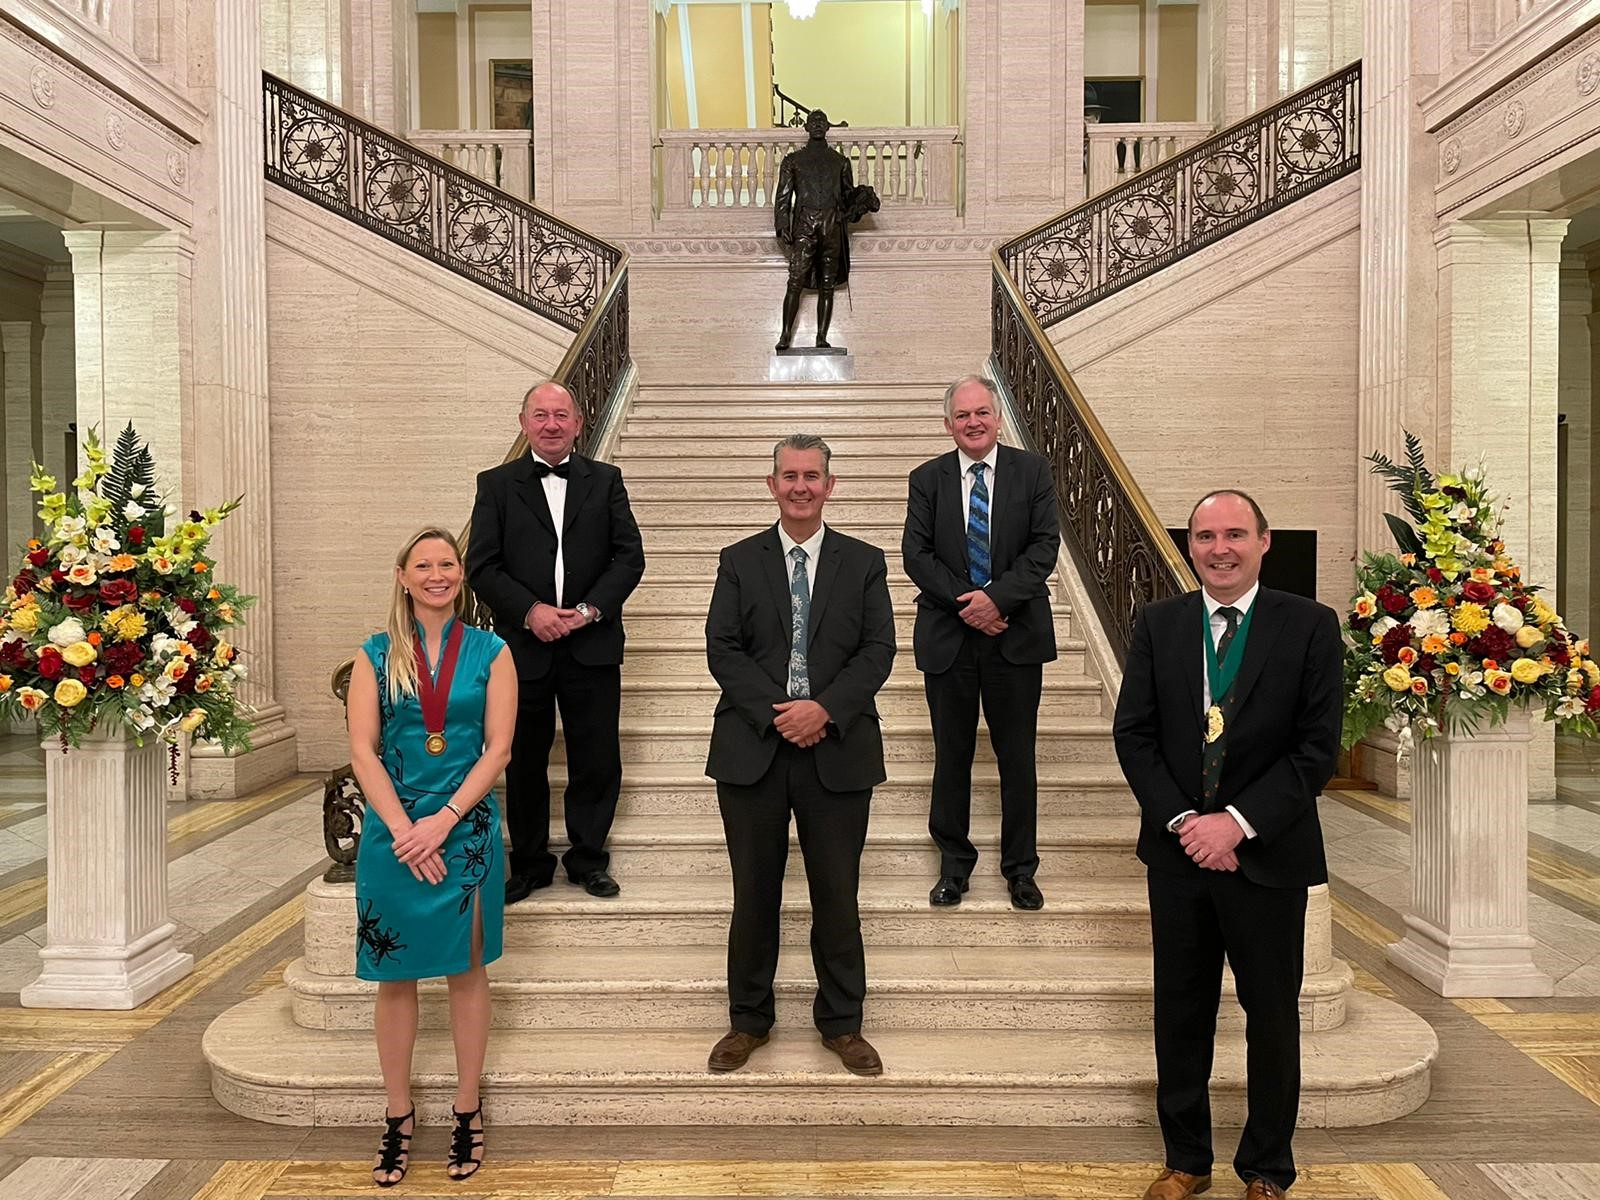 BVA President tells Stormont guests of ‘triple whammy’ pressures